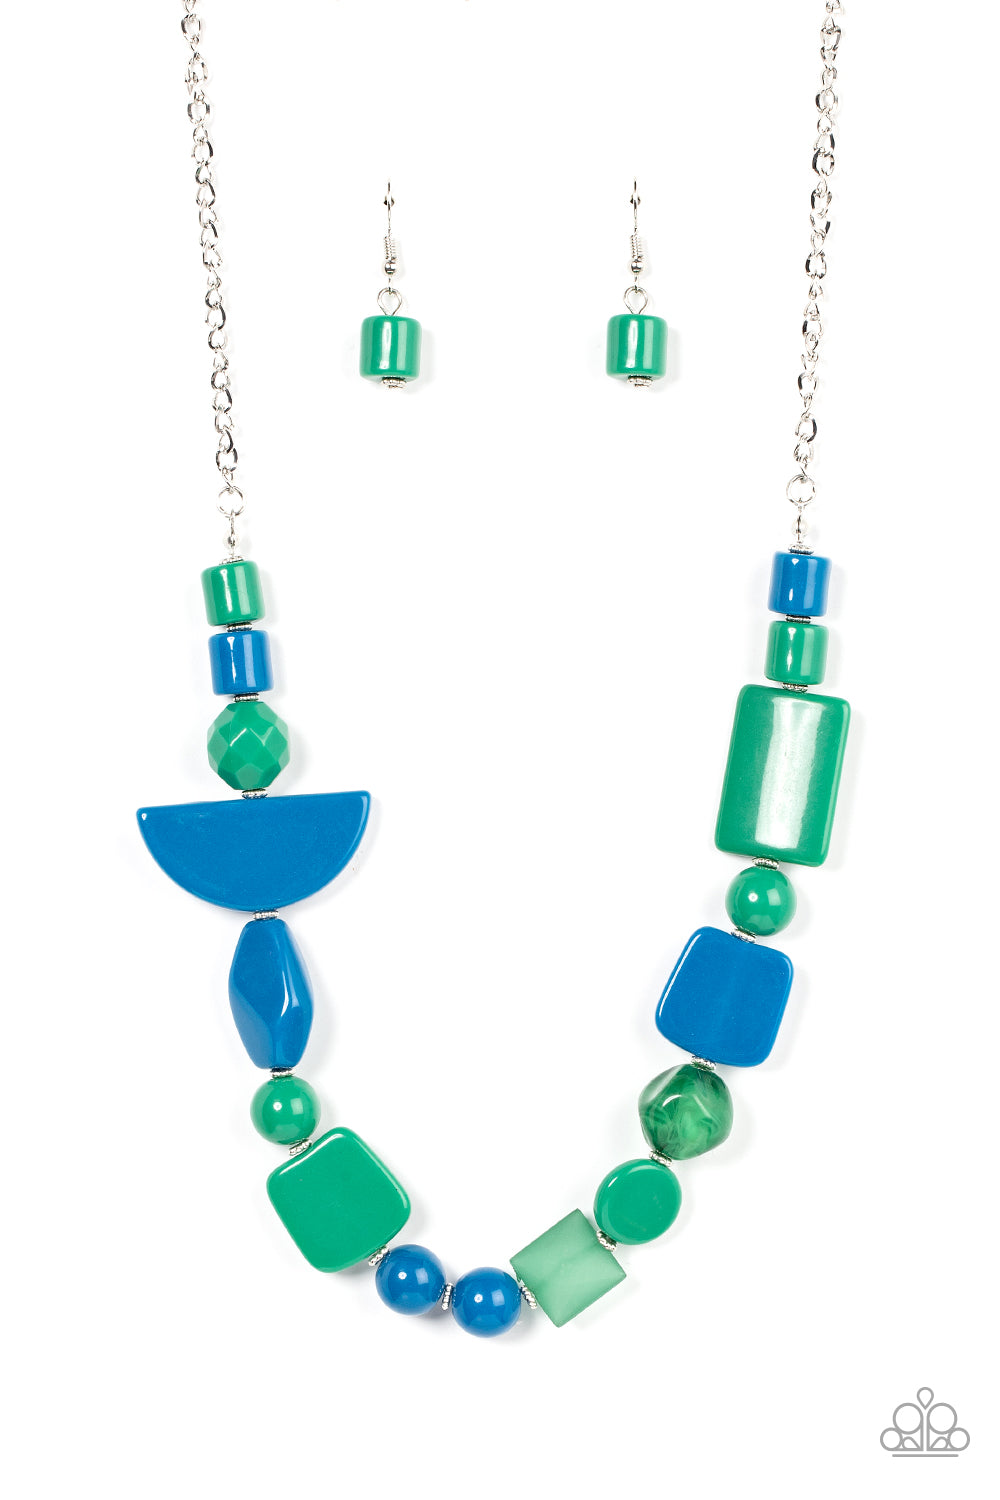 Tranquil Trendsetter - Green/Blue necklace